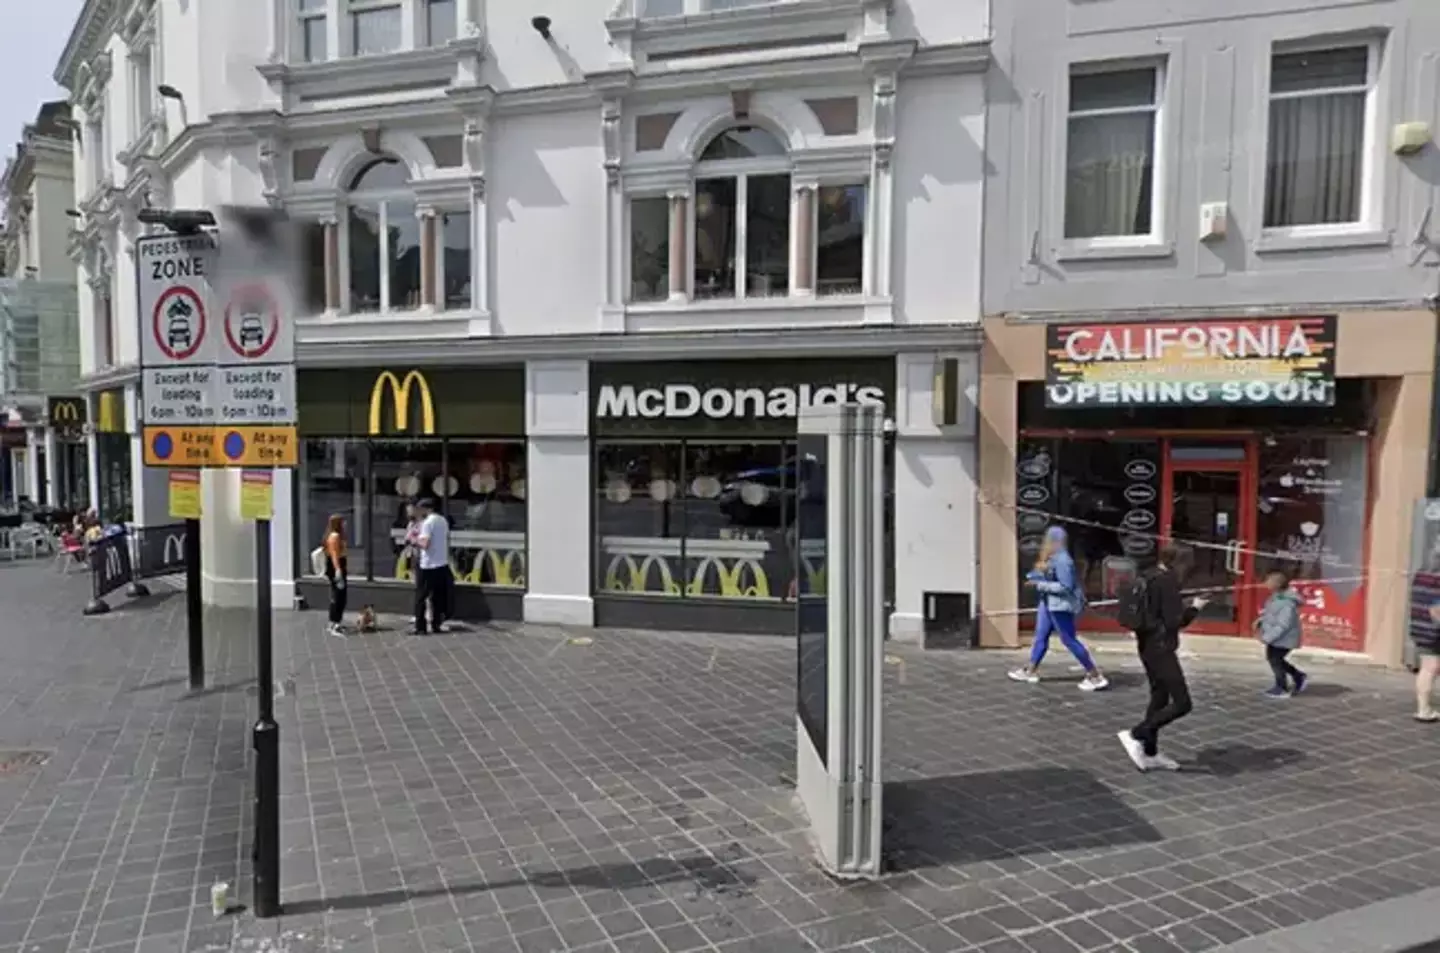 The McDonald's on Church Street, Liverpool, has banned under-18s after 5.00pm.